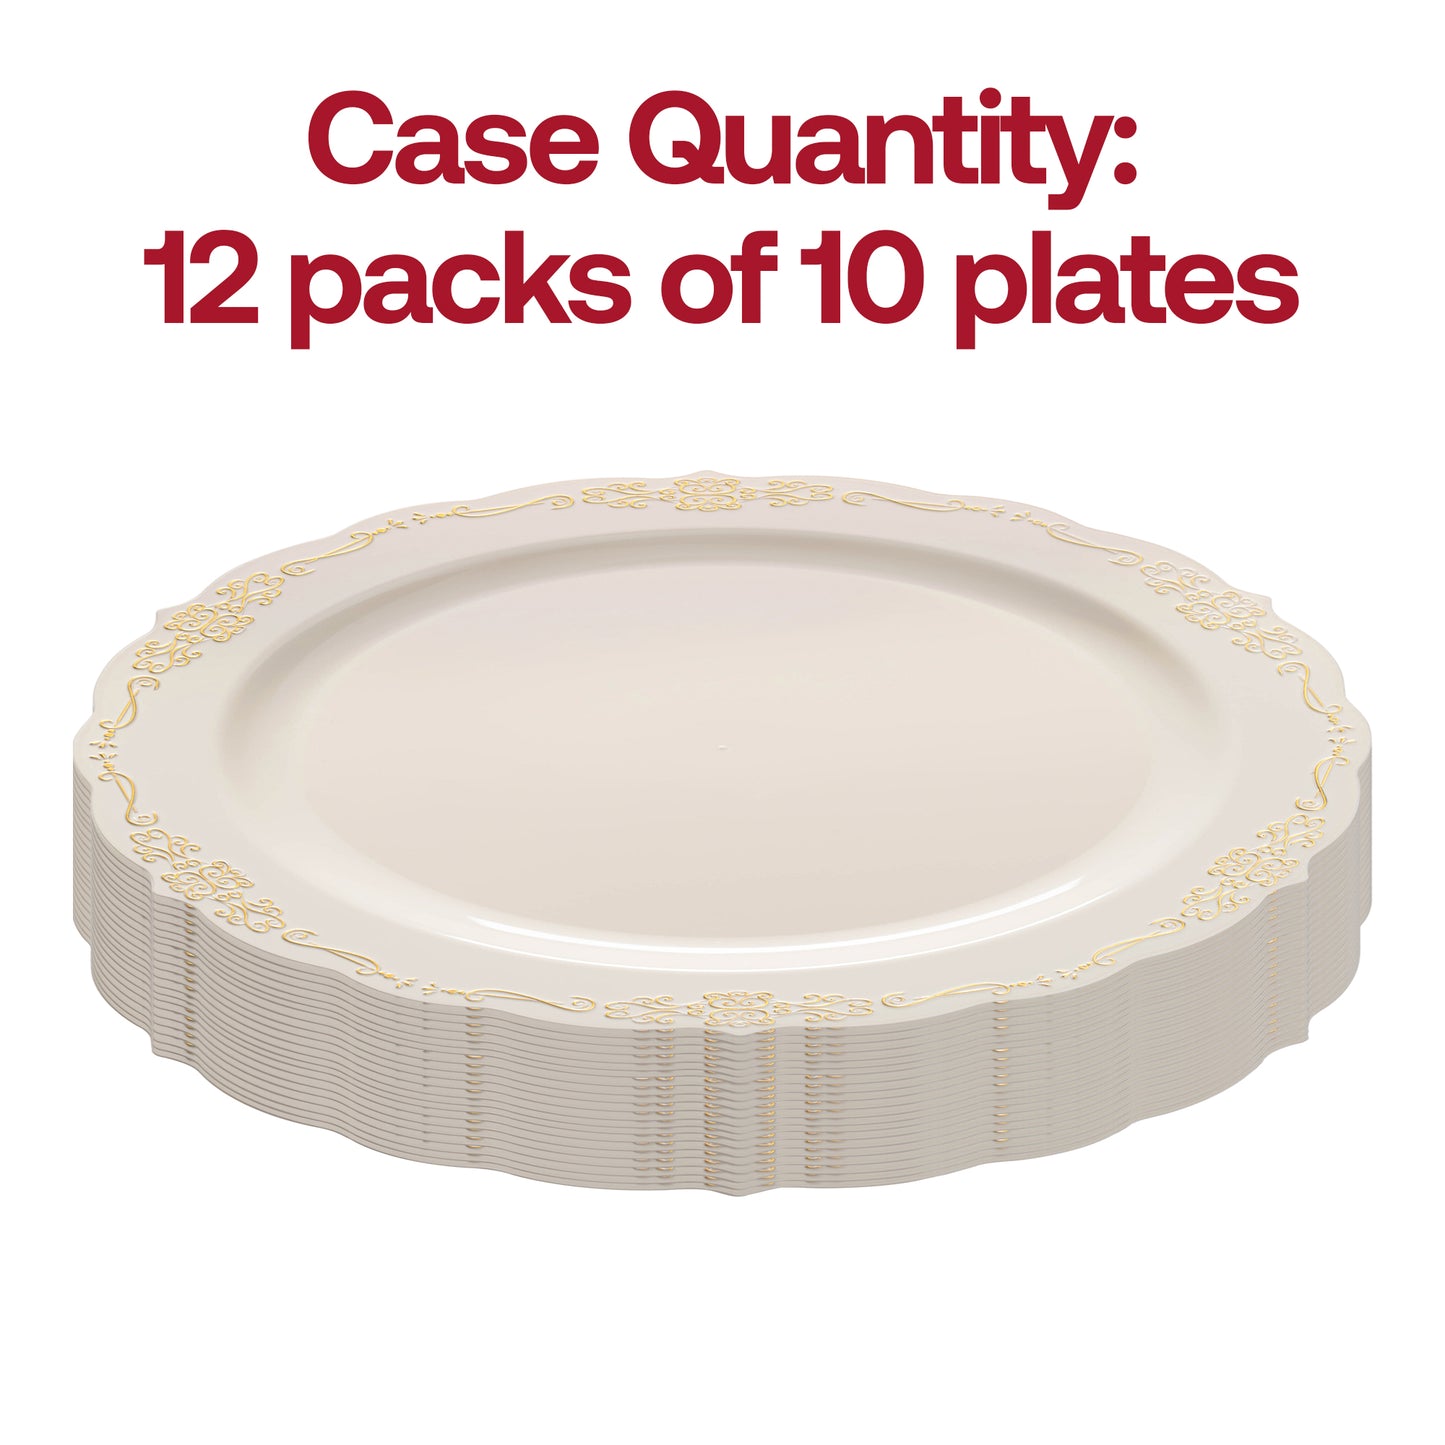 Ivory with Gold Vintage Rim Round Disposable Plastic Appetizer/Salad Plates (7.5") Quantity | The Kaya Collection